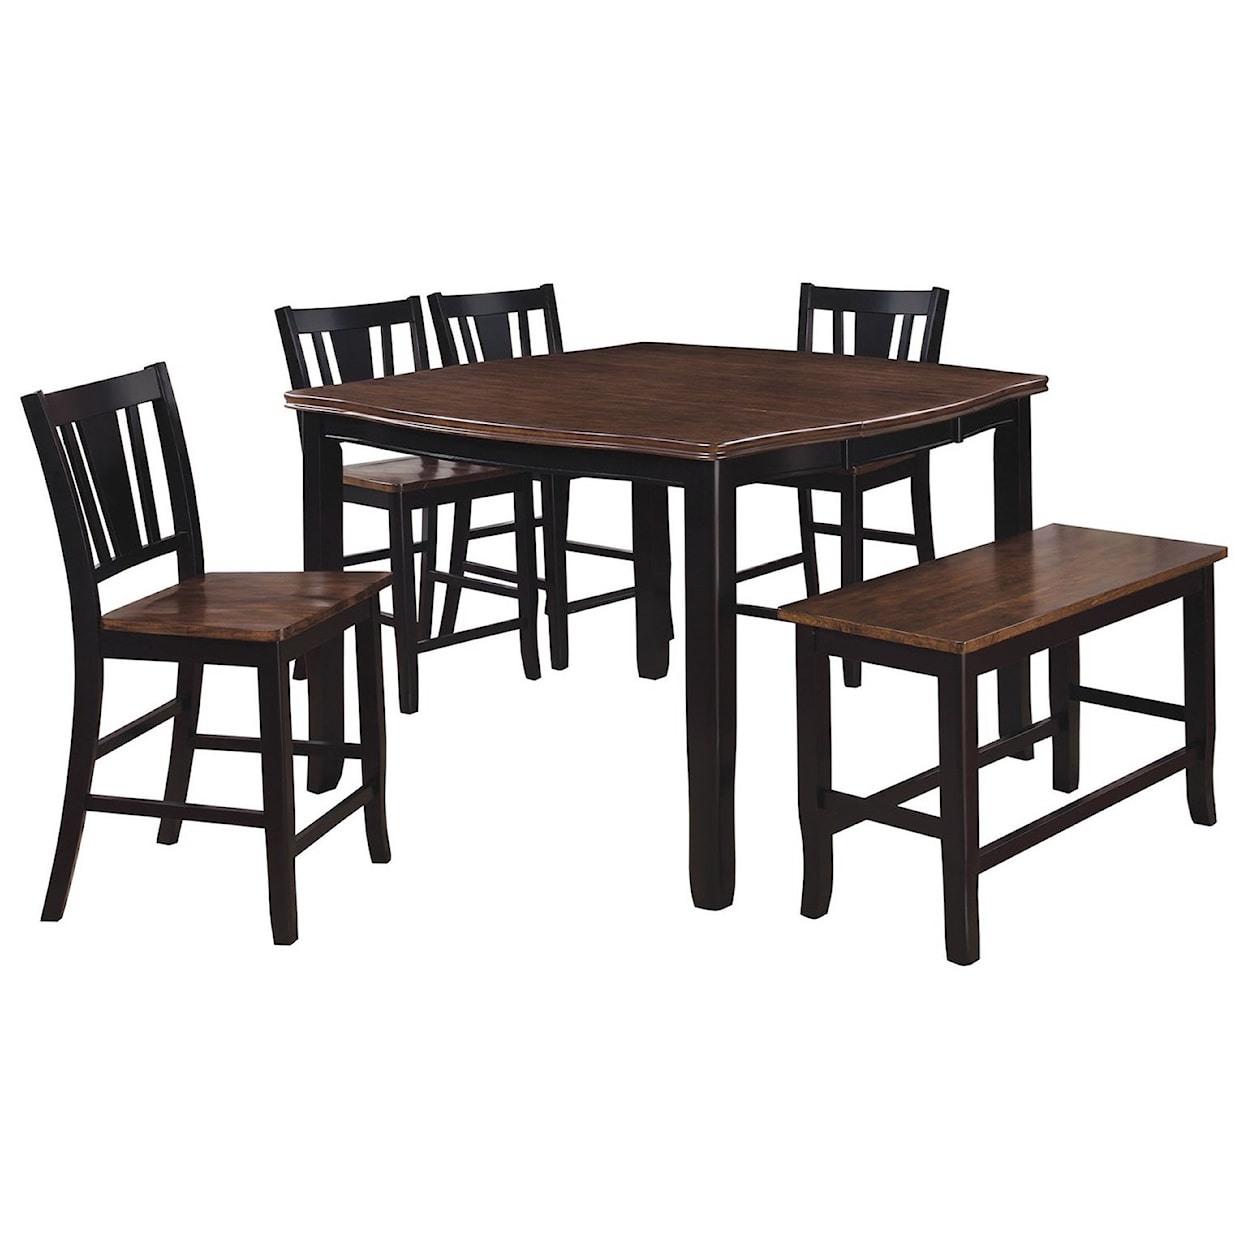 Furniture of America Dover II Table + 8 Side Chairs